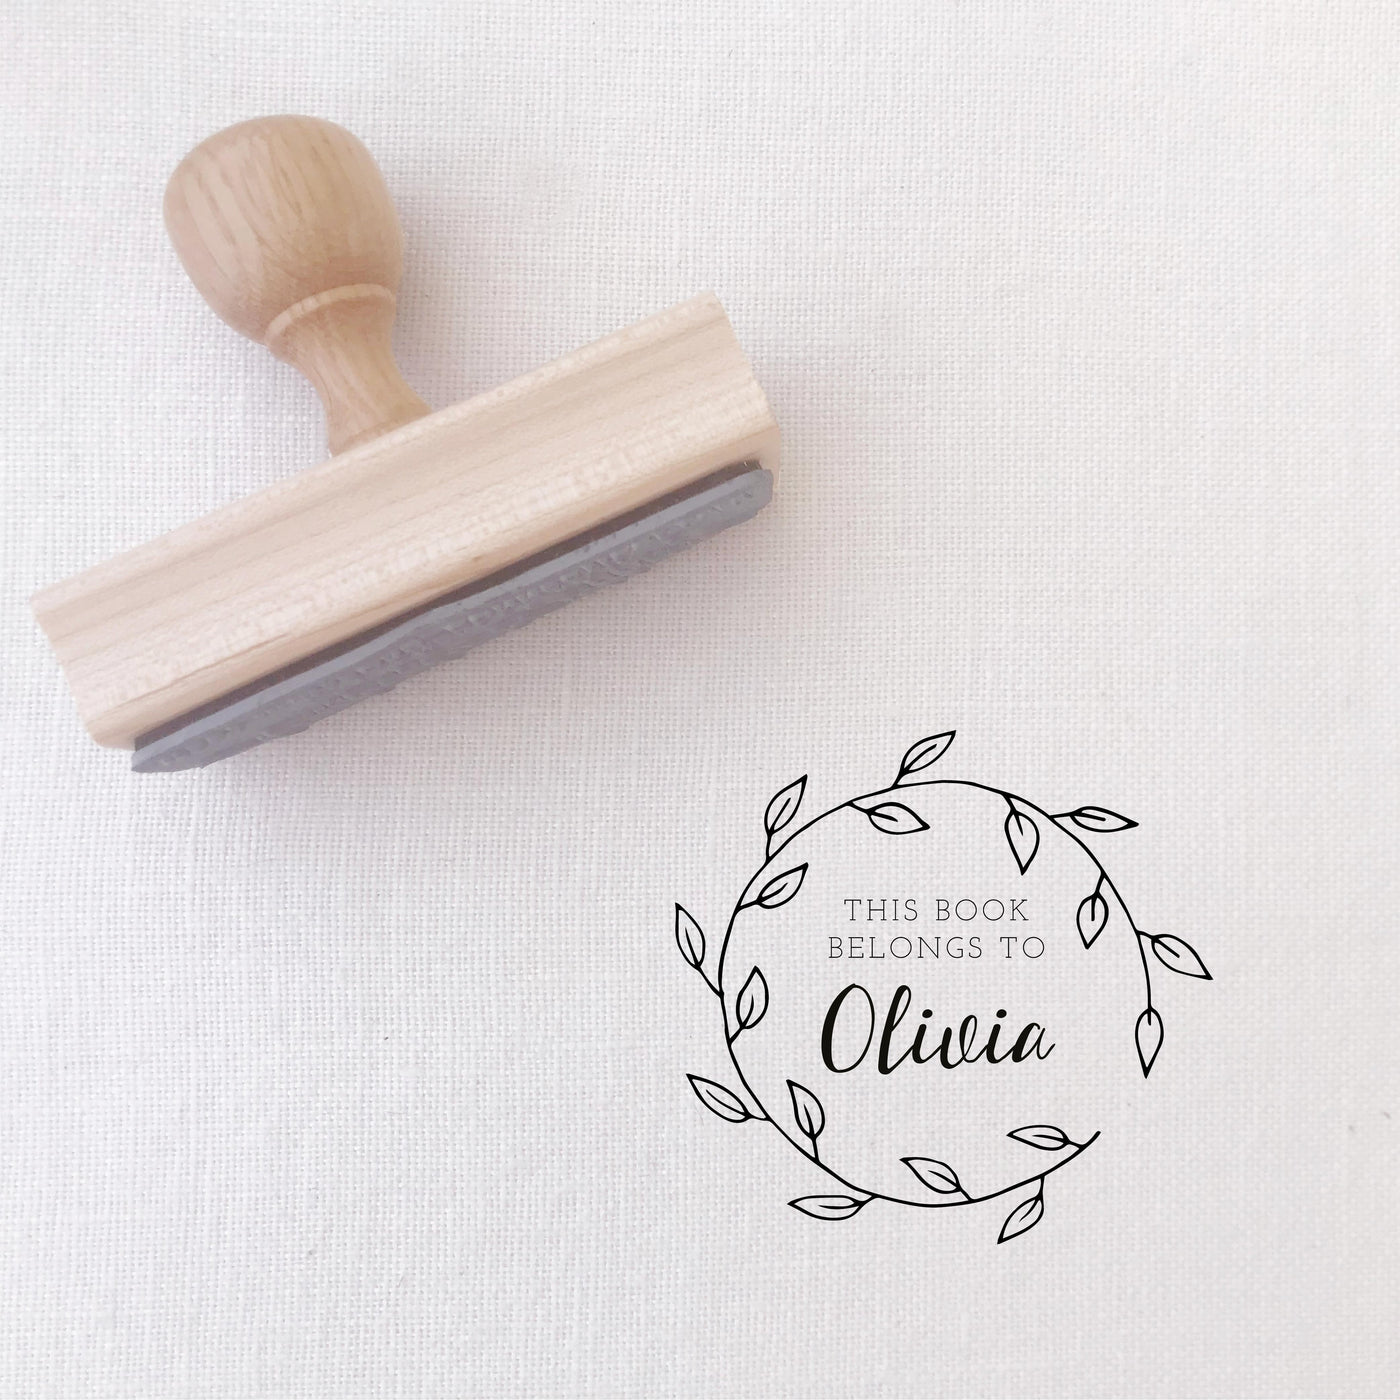 Sadie Rustic Calligraphy Script Library Book Stamp | Custom Ex Libre Rubber Stamp with Wooden Handle for Wedding Couple & Family Gift, Luxe Packaging Embellishment | Heirloom Seals